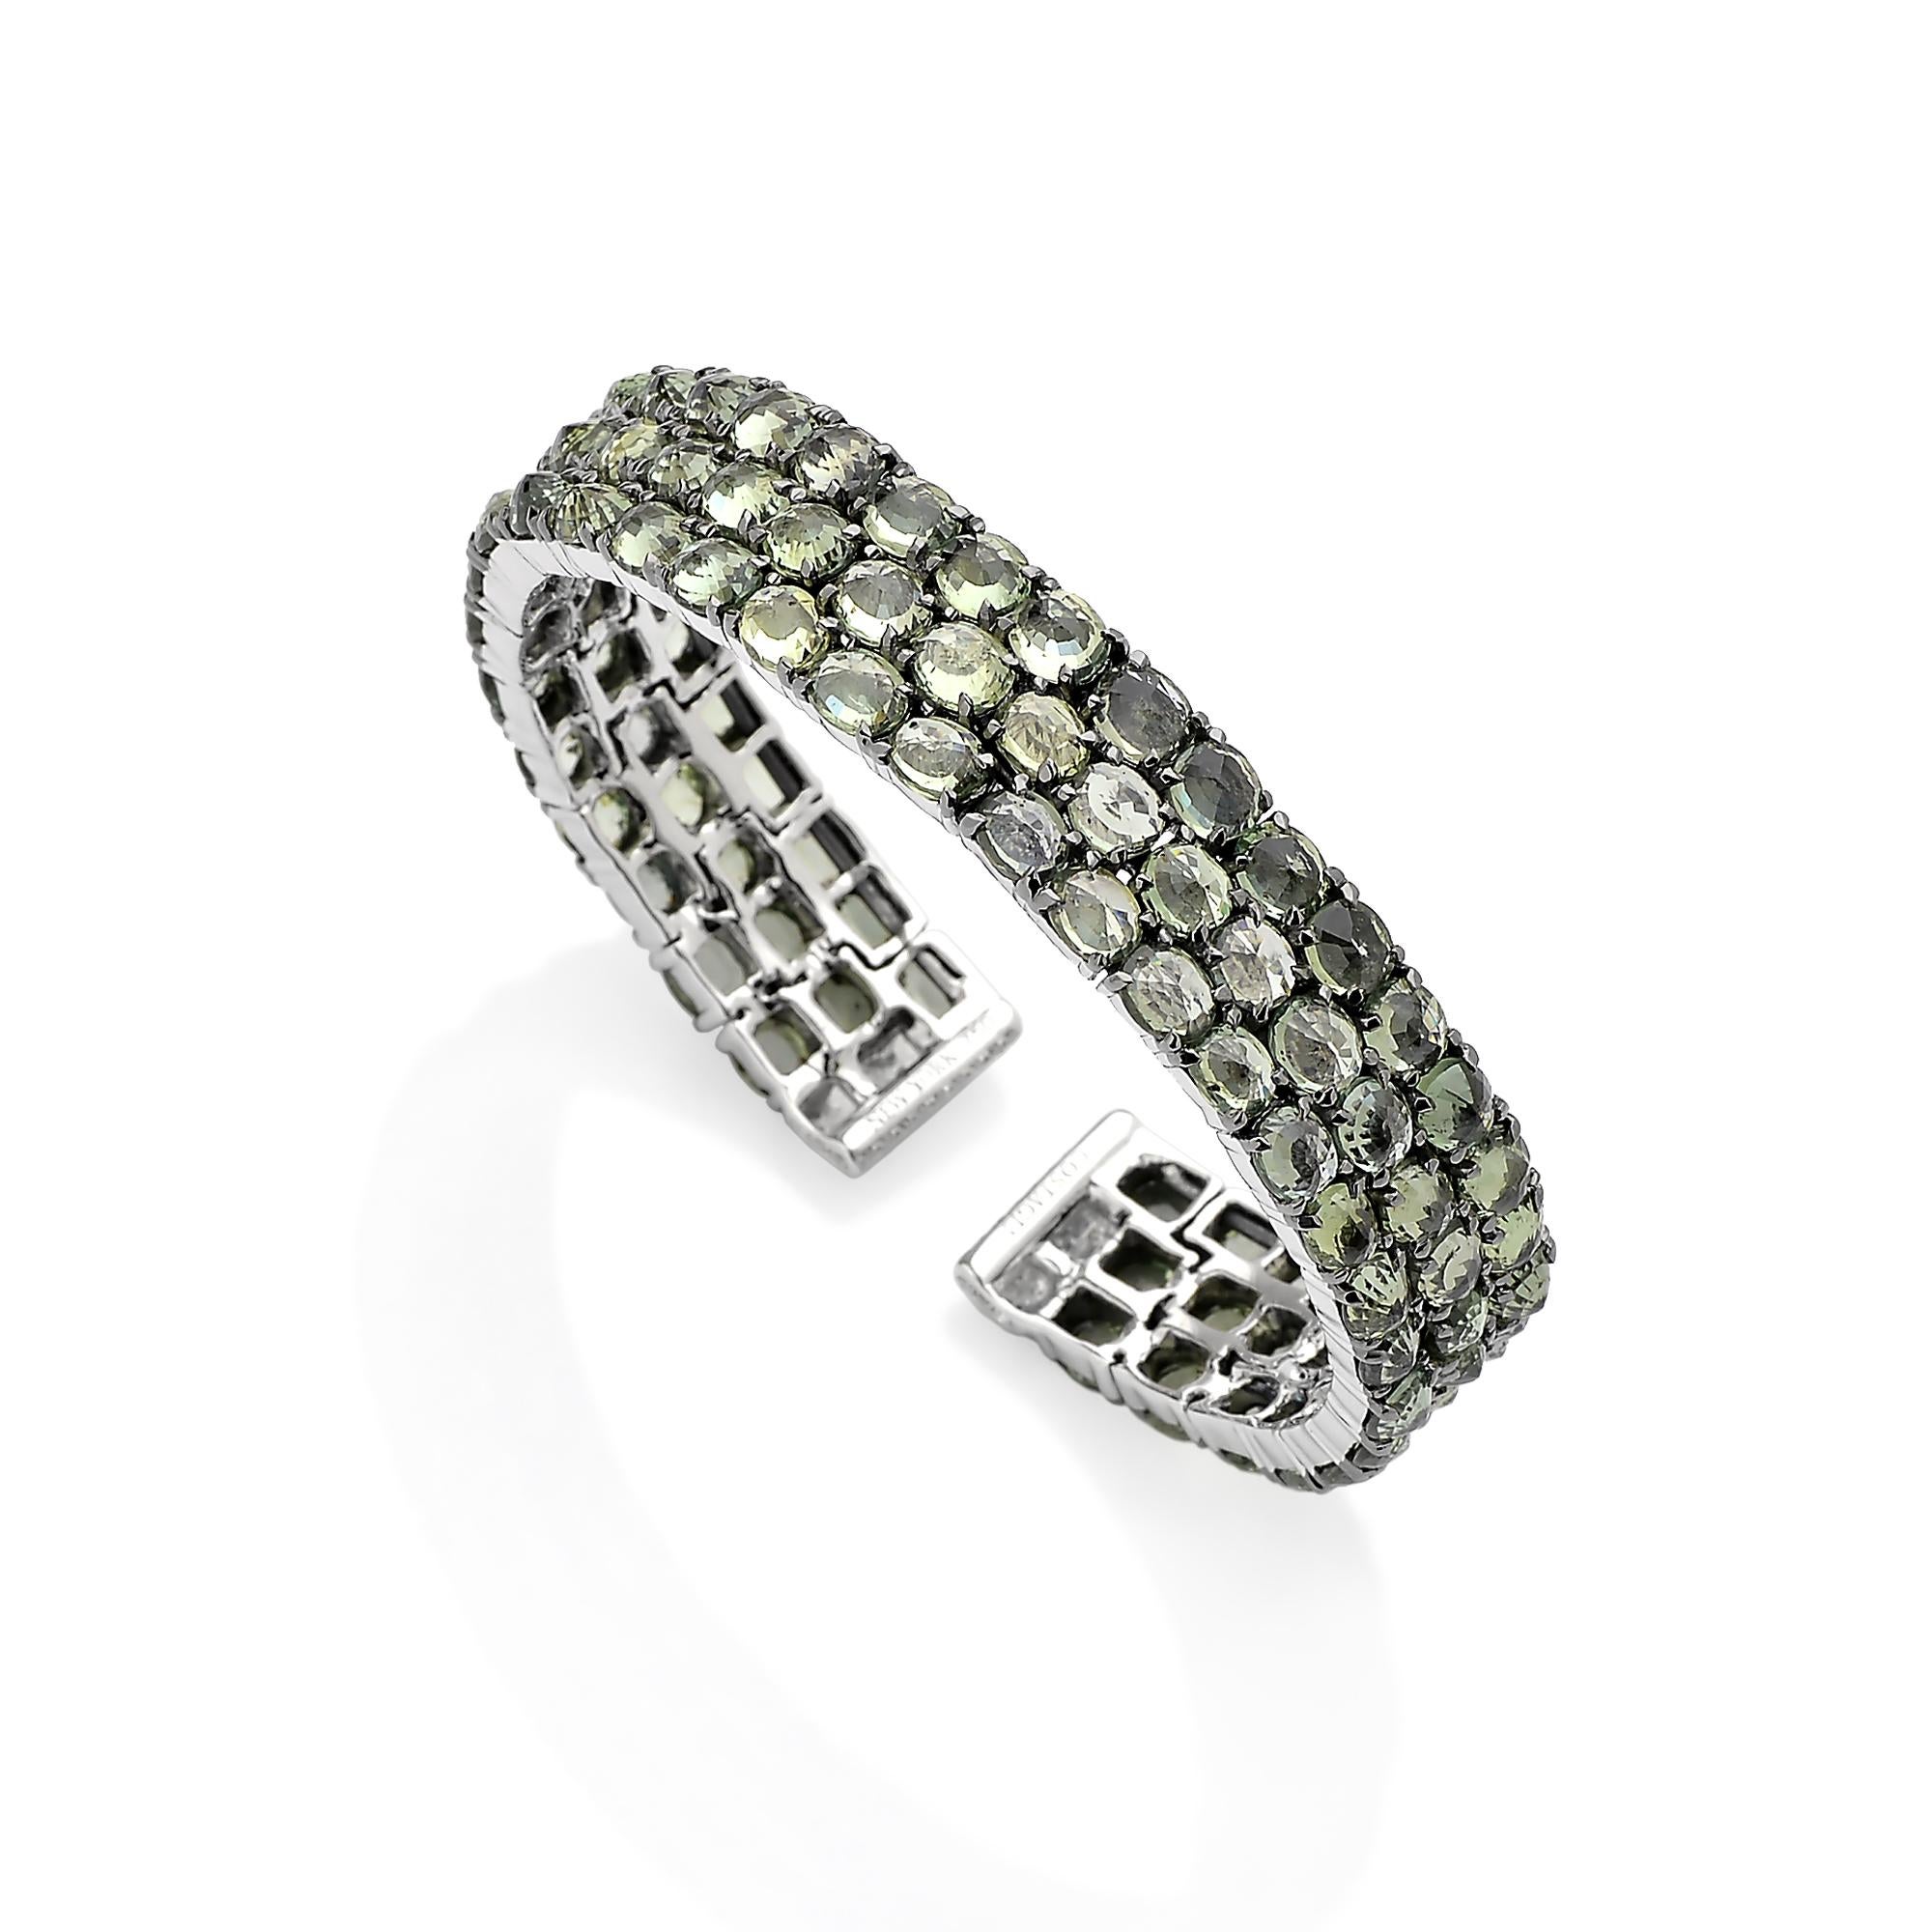 From the Ombre Collection, green sapphire flexible cuff bracelet with pave-set round, brilliant diamonds in 18 karat white gold. 

Reimagined from summers spent at the Tuscan shore, the Ombre Collection highlights the diverse hues and textures found